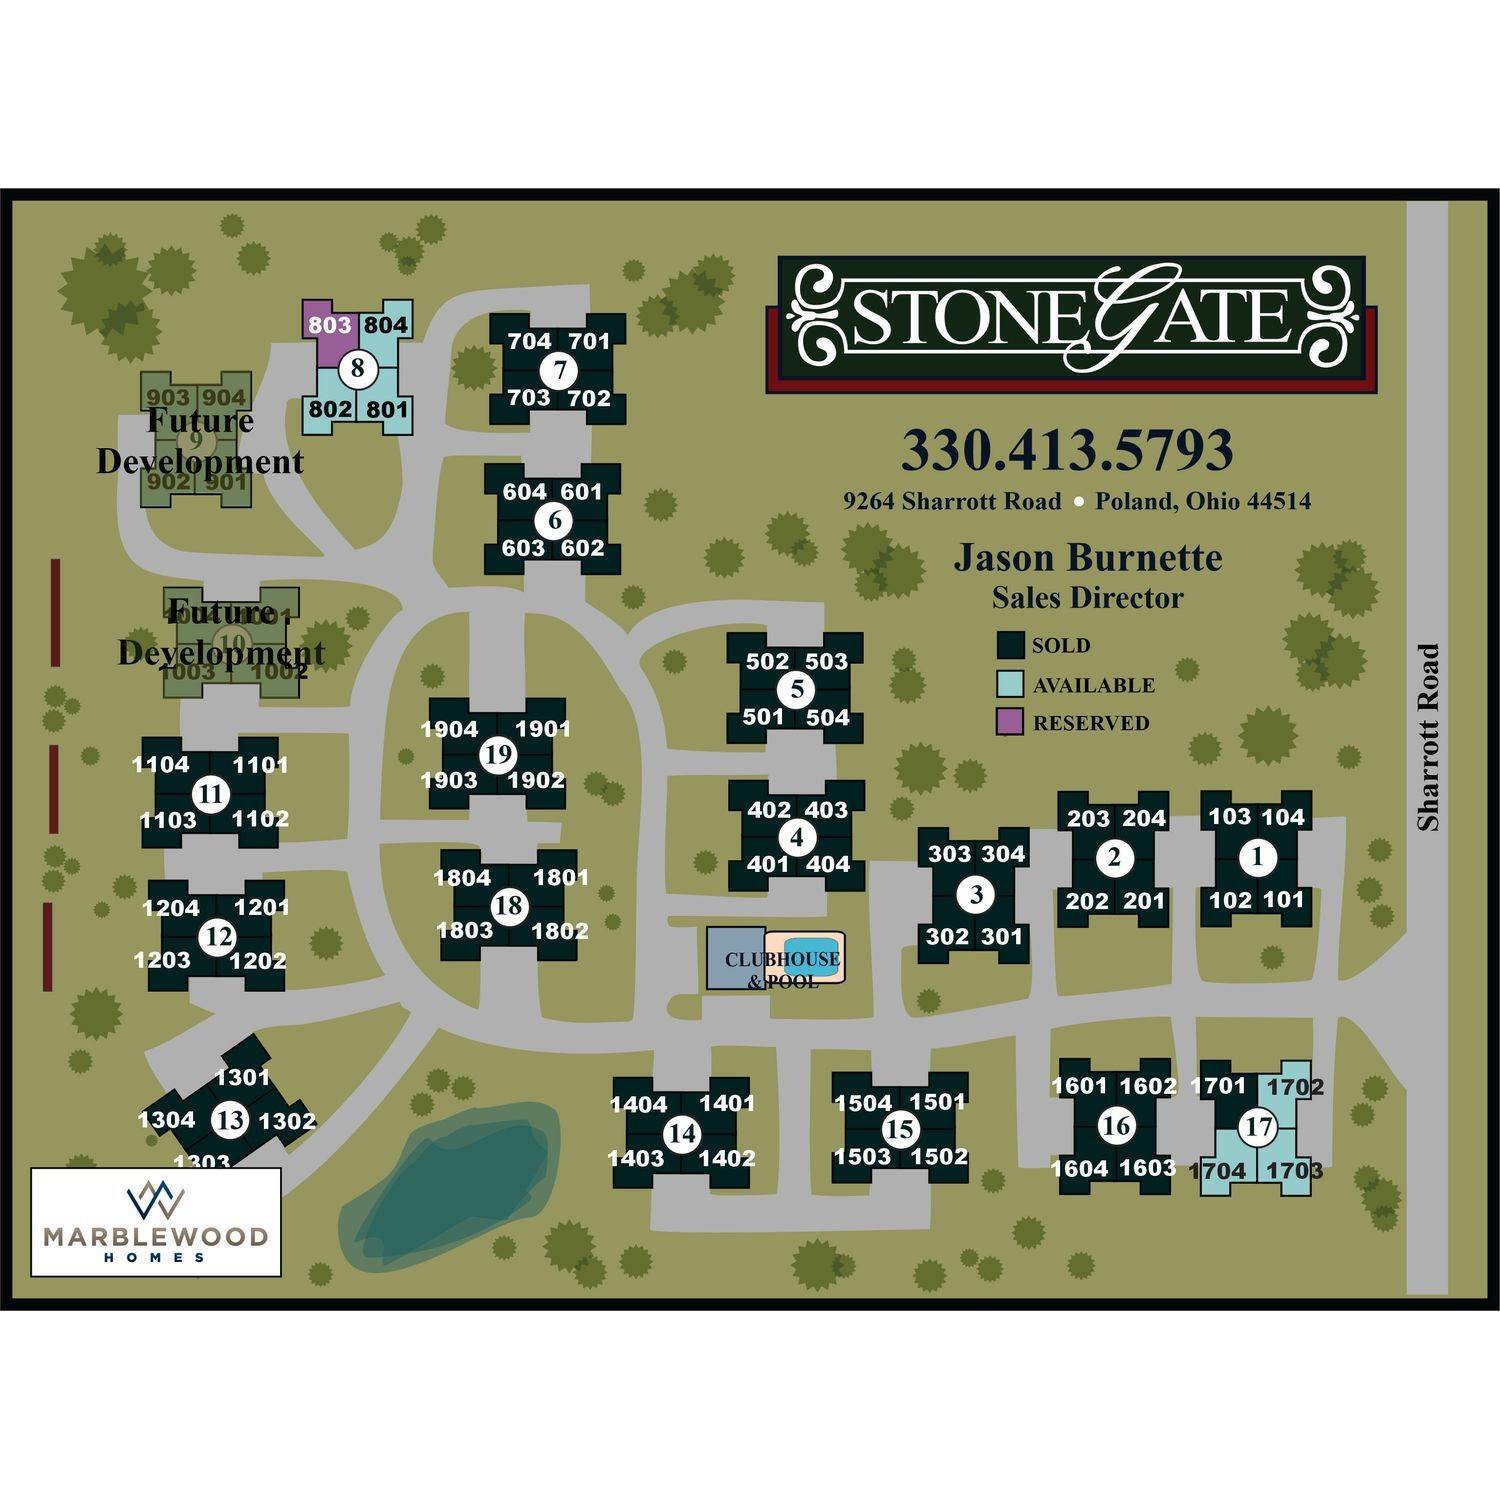 4. The Courtyards at Stonegate建于 9264 Sharrott Rd., Poland, OH 44514